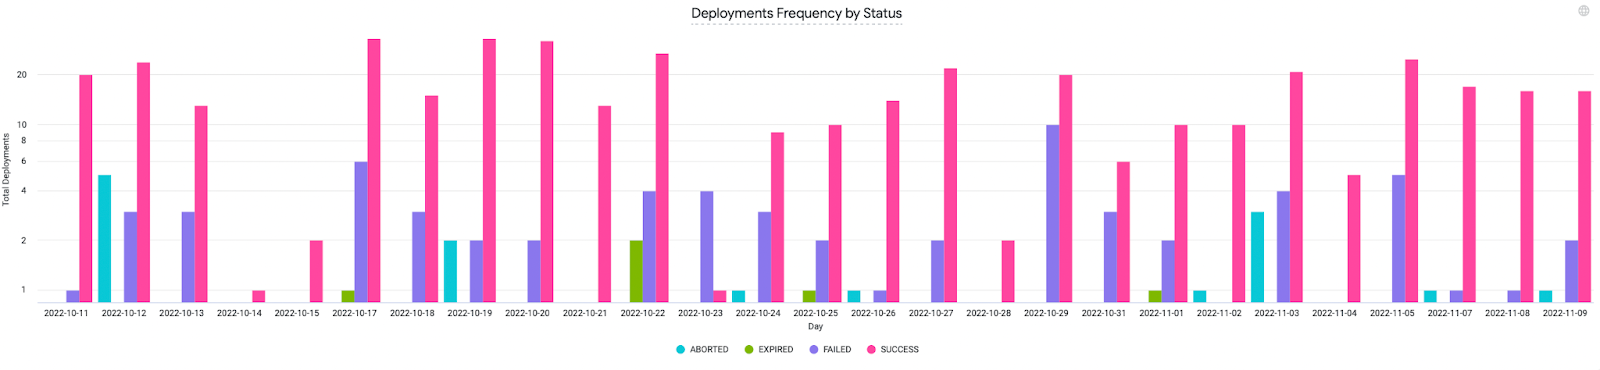 Example deployments frequency chart